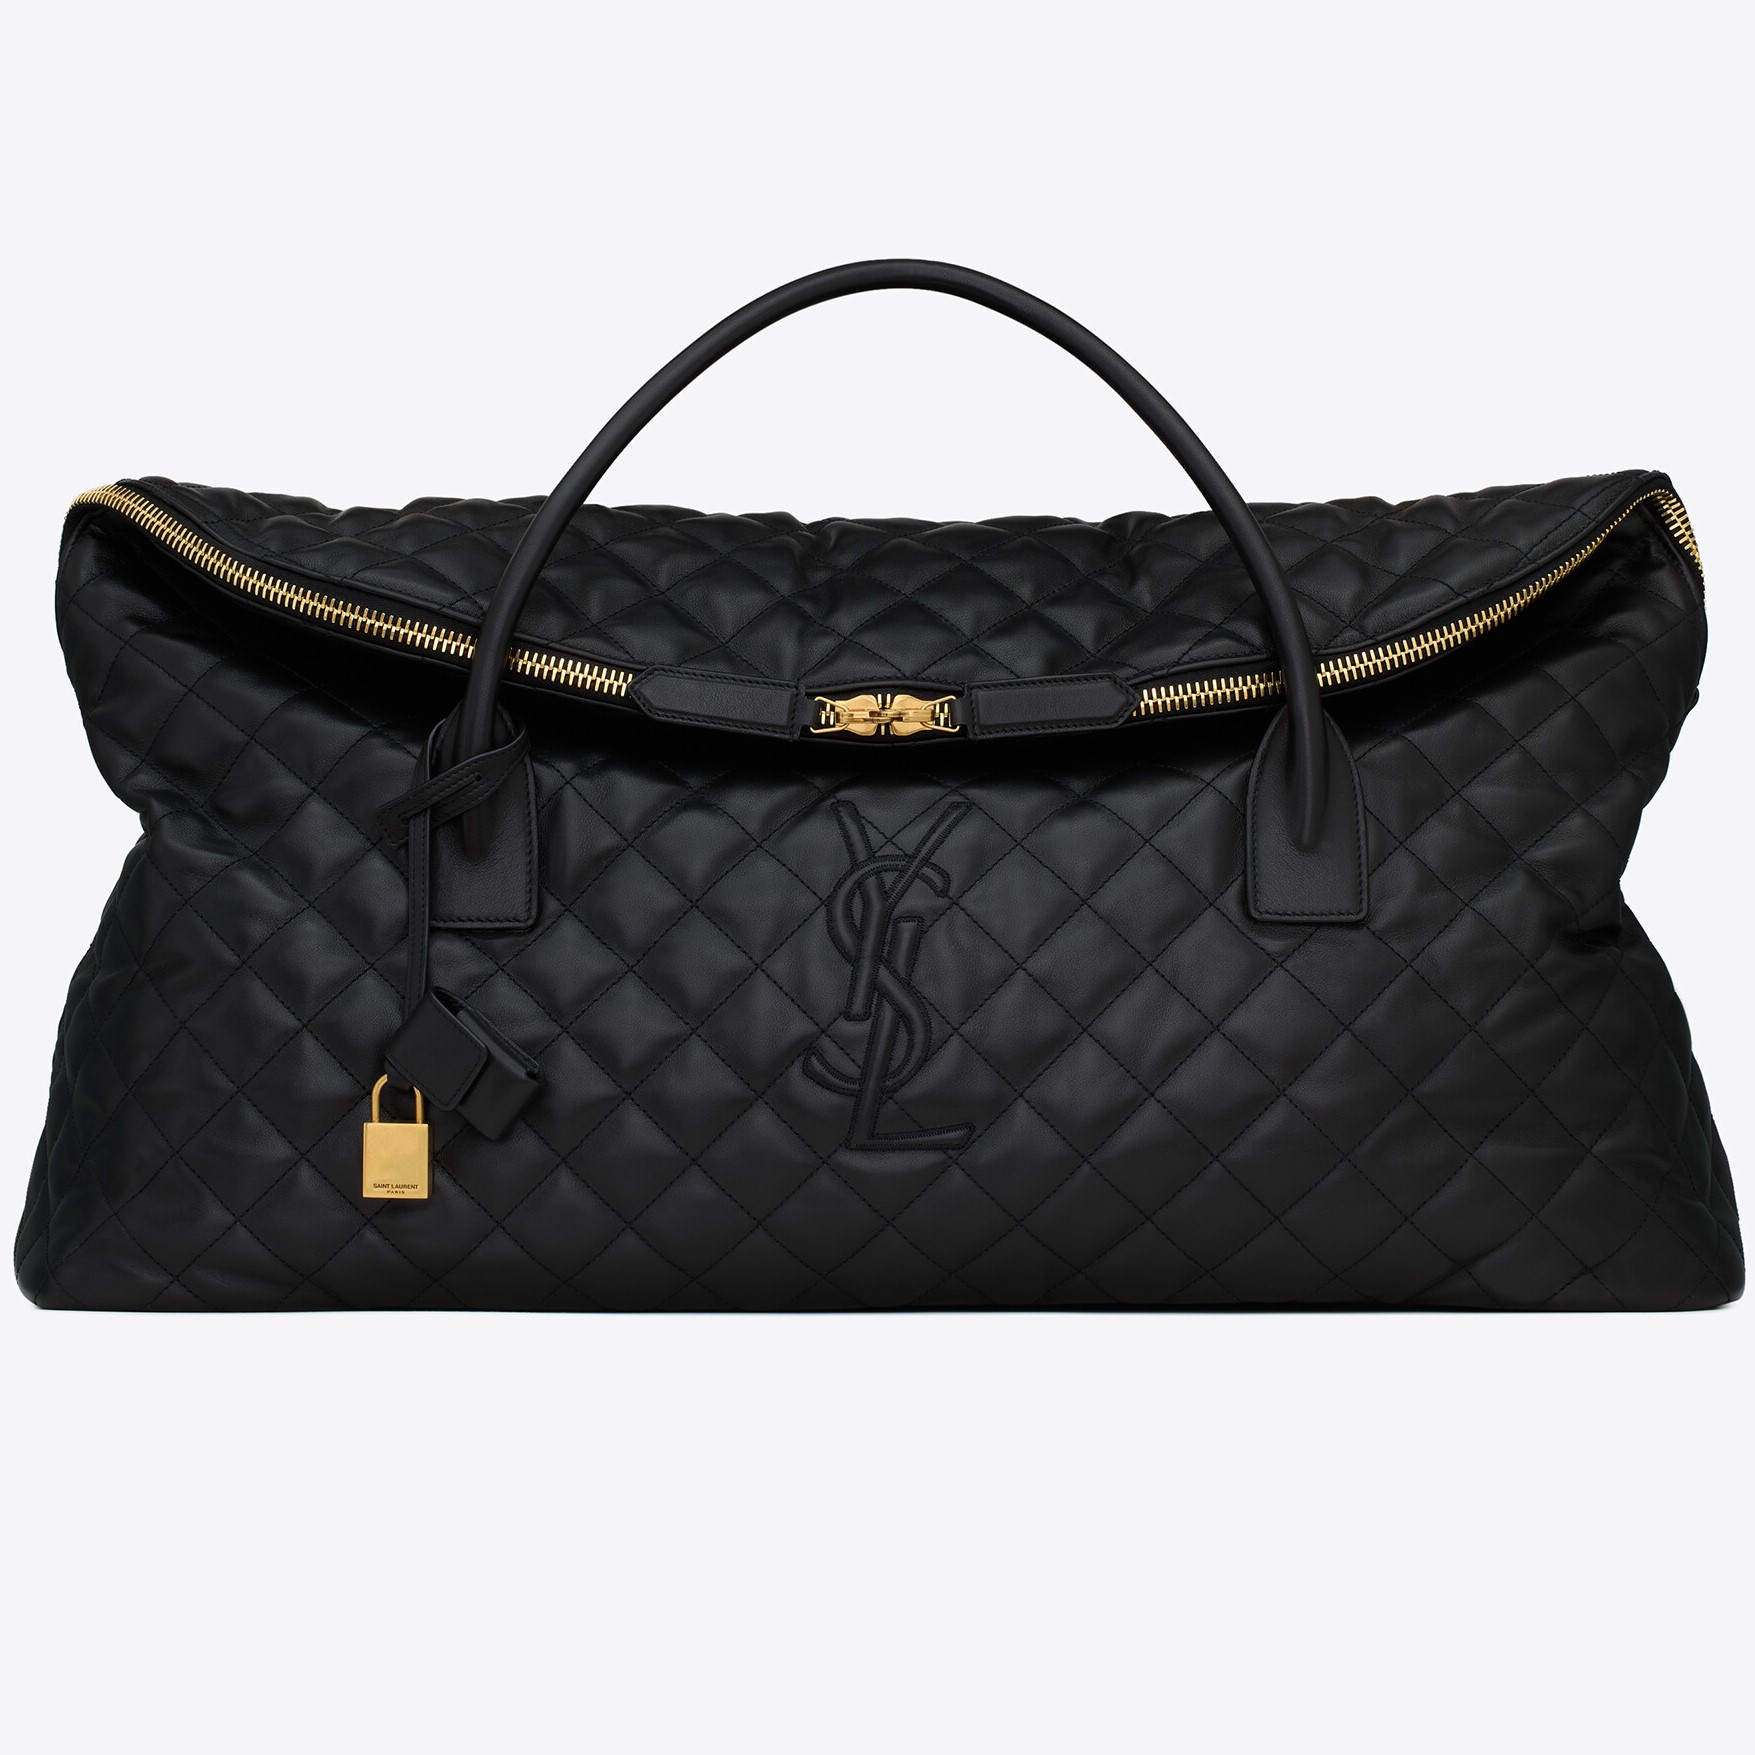 TÚI DU LỊCH YSL ES GIANT TRAVEL BAG IN QUILTED LEATHER 10